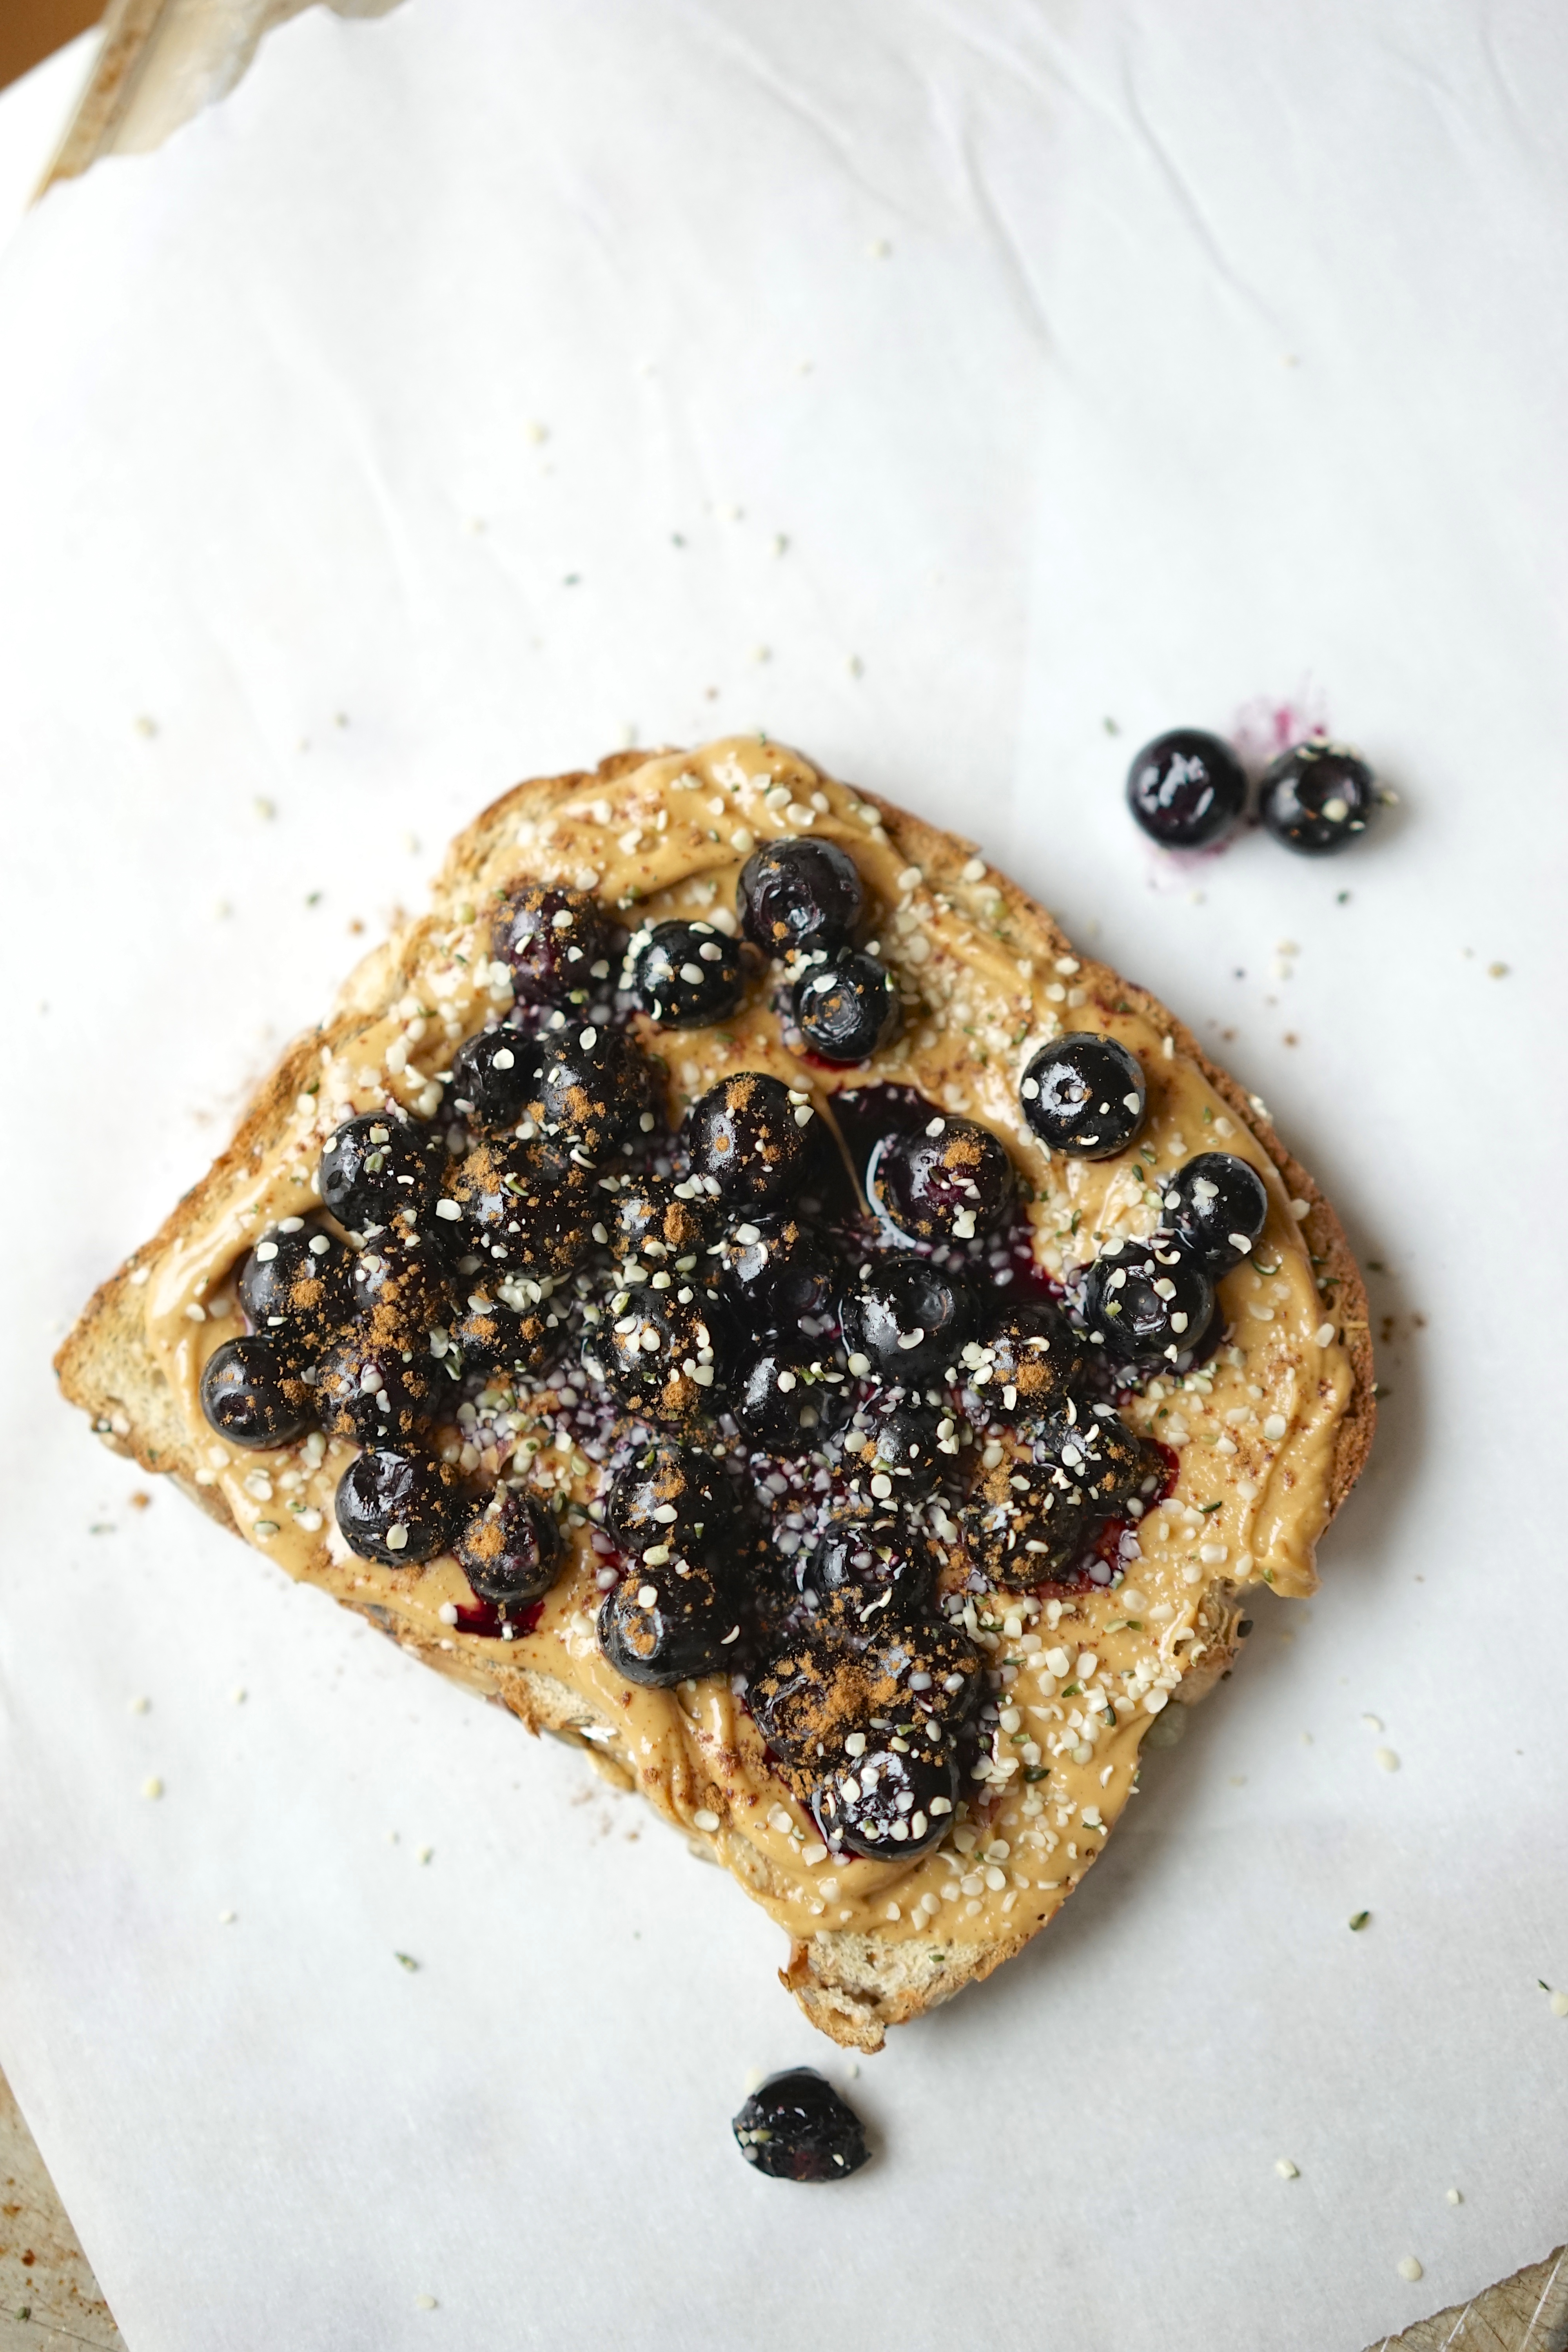 Peanut Butter & Cinnamon Blueberry Toast with Hemp Hearts | Living Healthy in Seattle